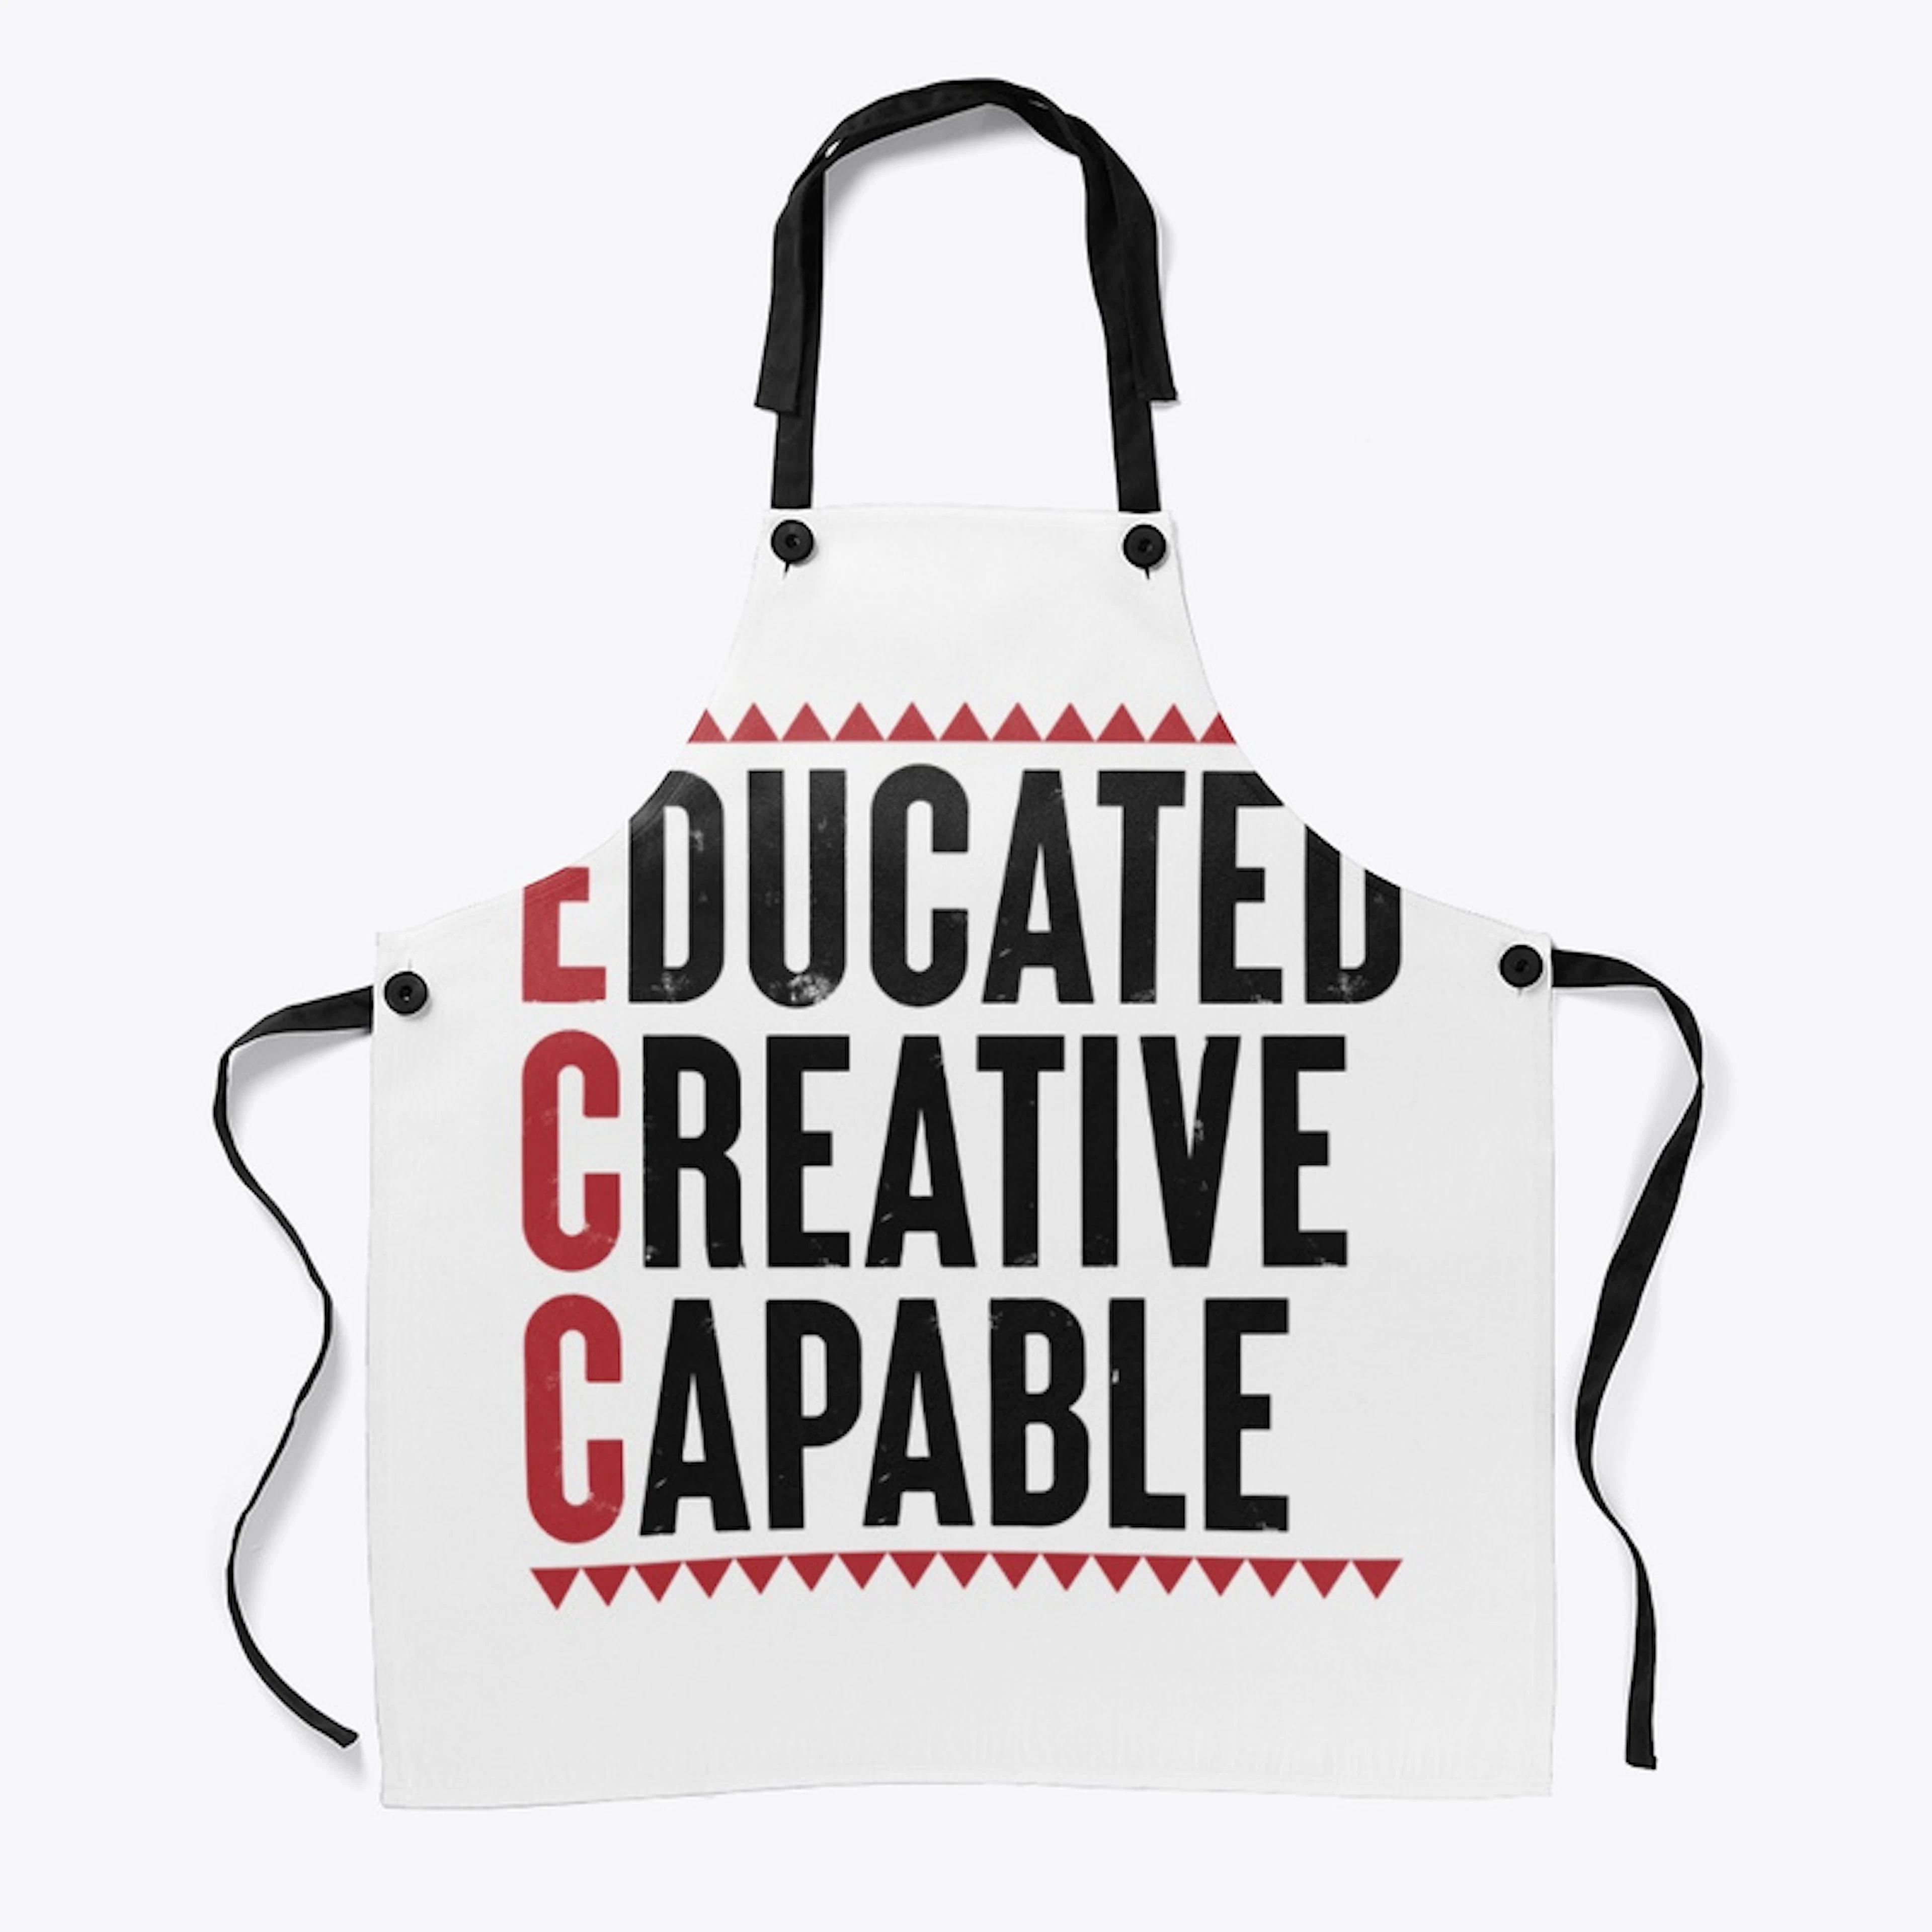 Educated Creative Capable dark lettering